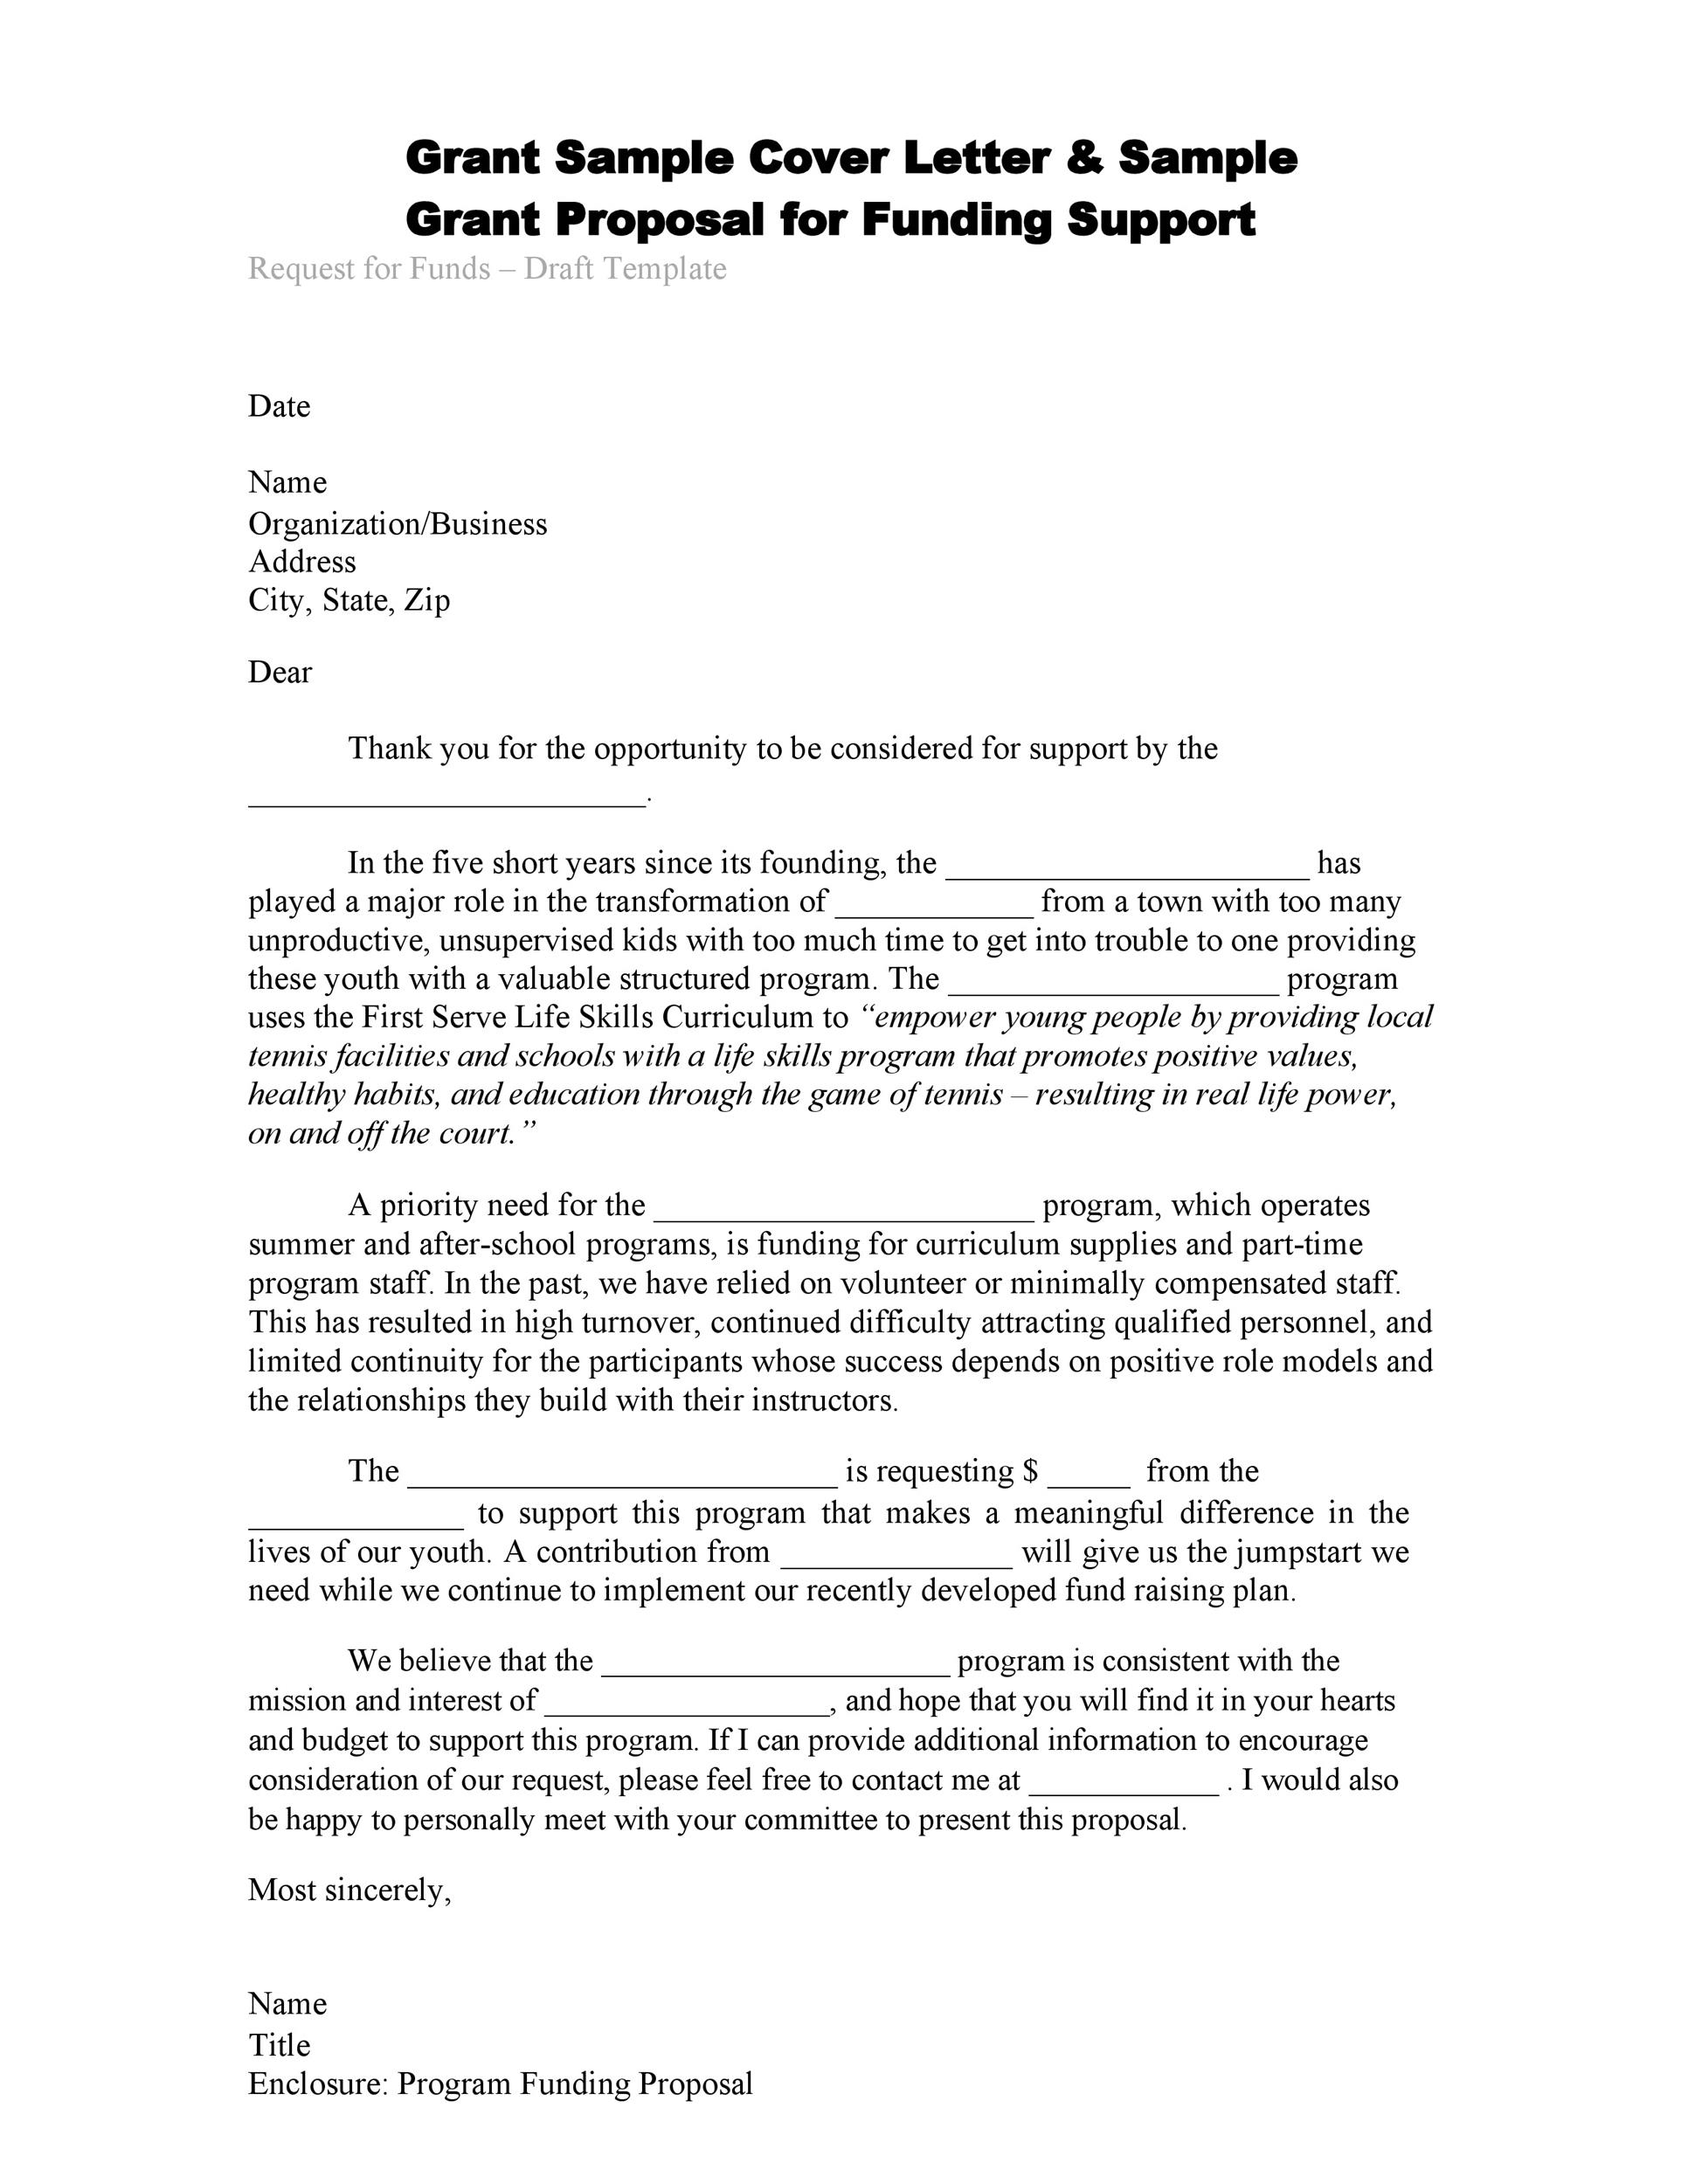 Free Grant Proposal Cover Letter Template How to Write a Proposal